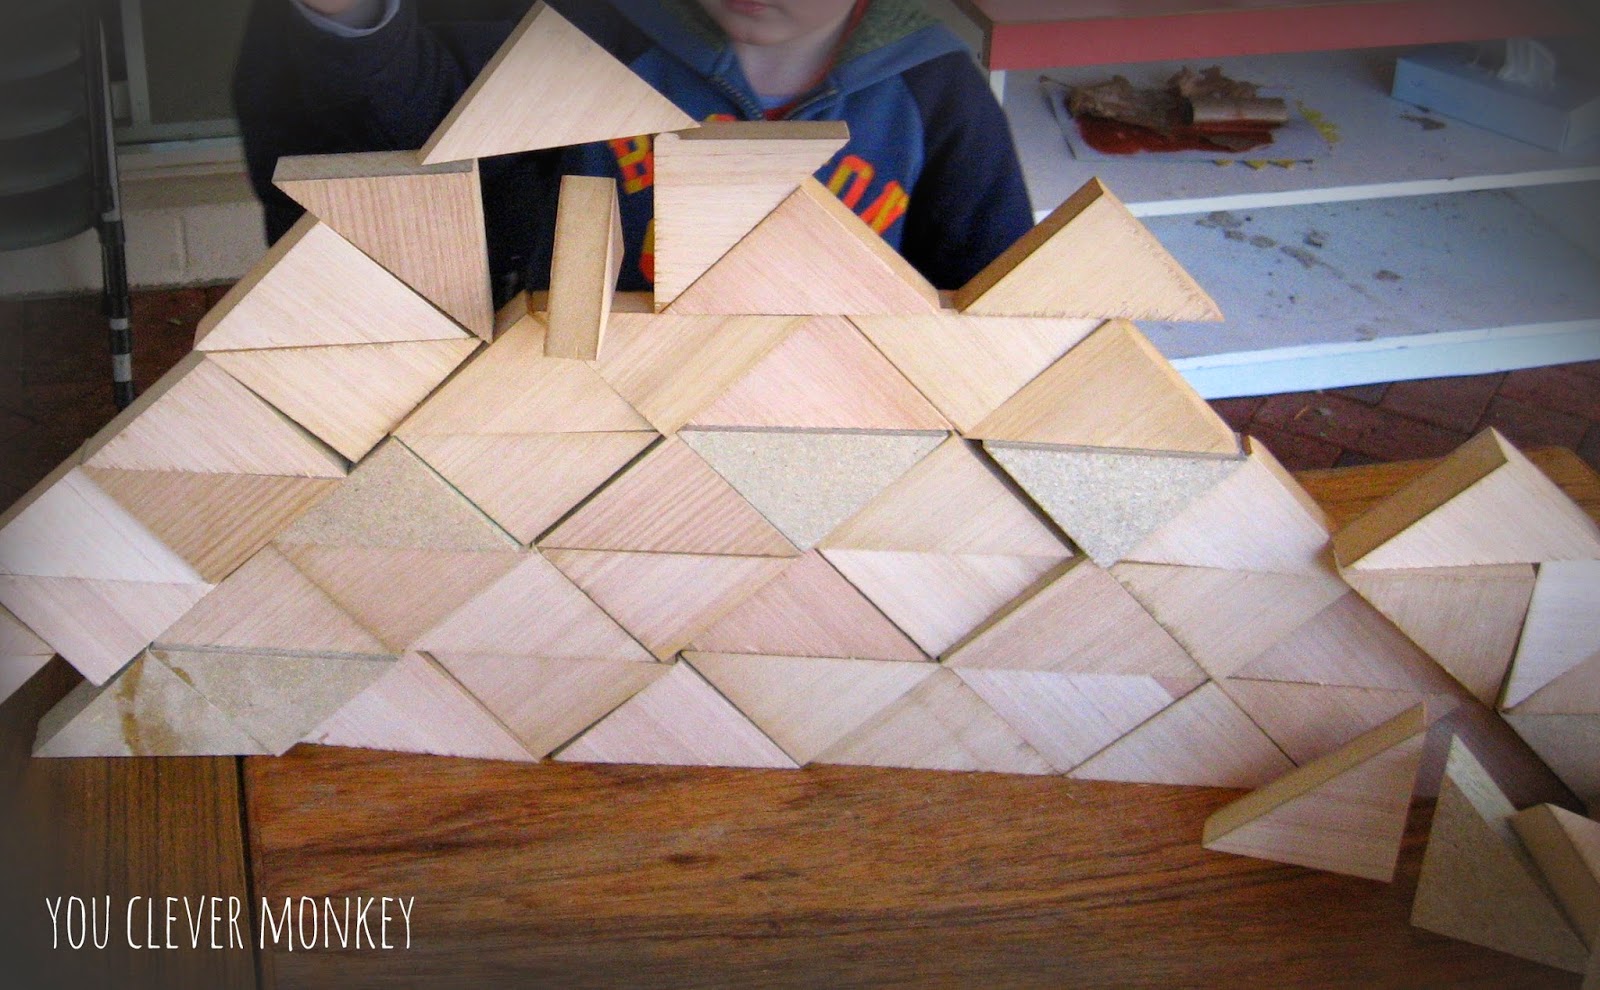 Beautiful stuff preschool project.  Find more information at http://youclevermonkey.com